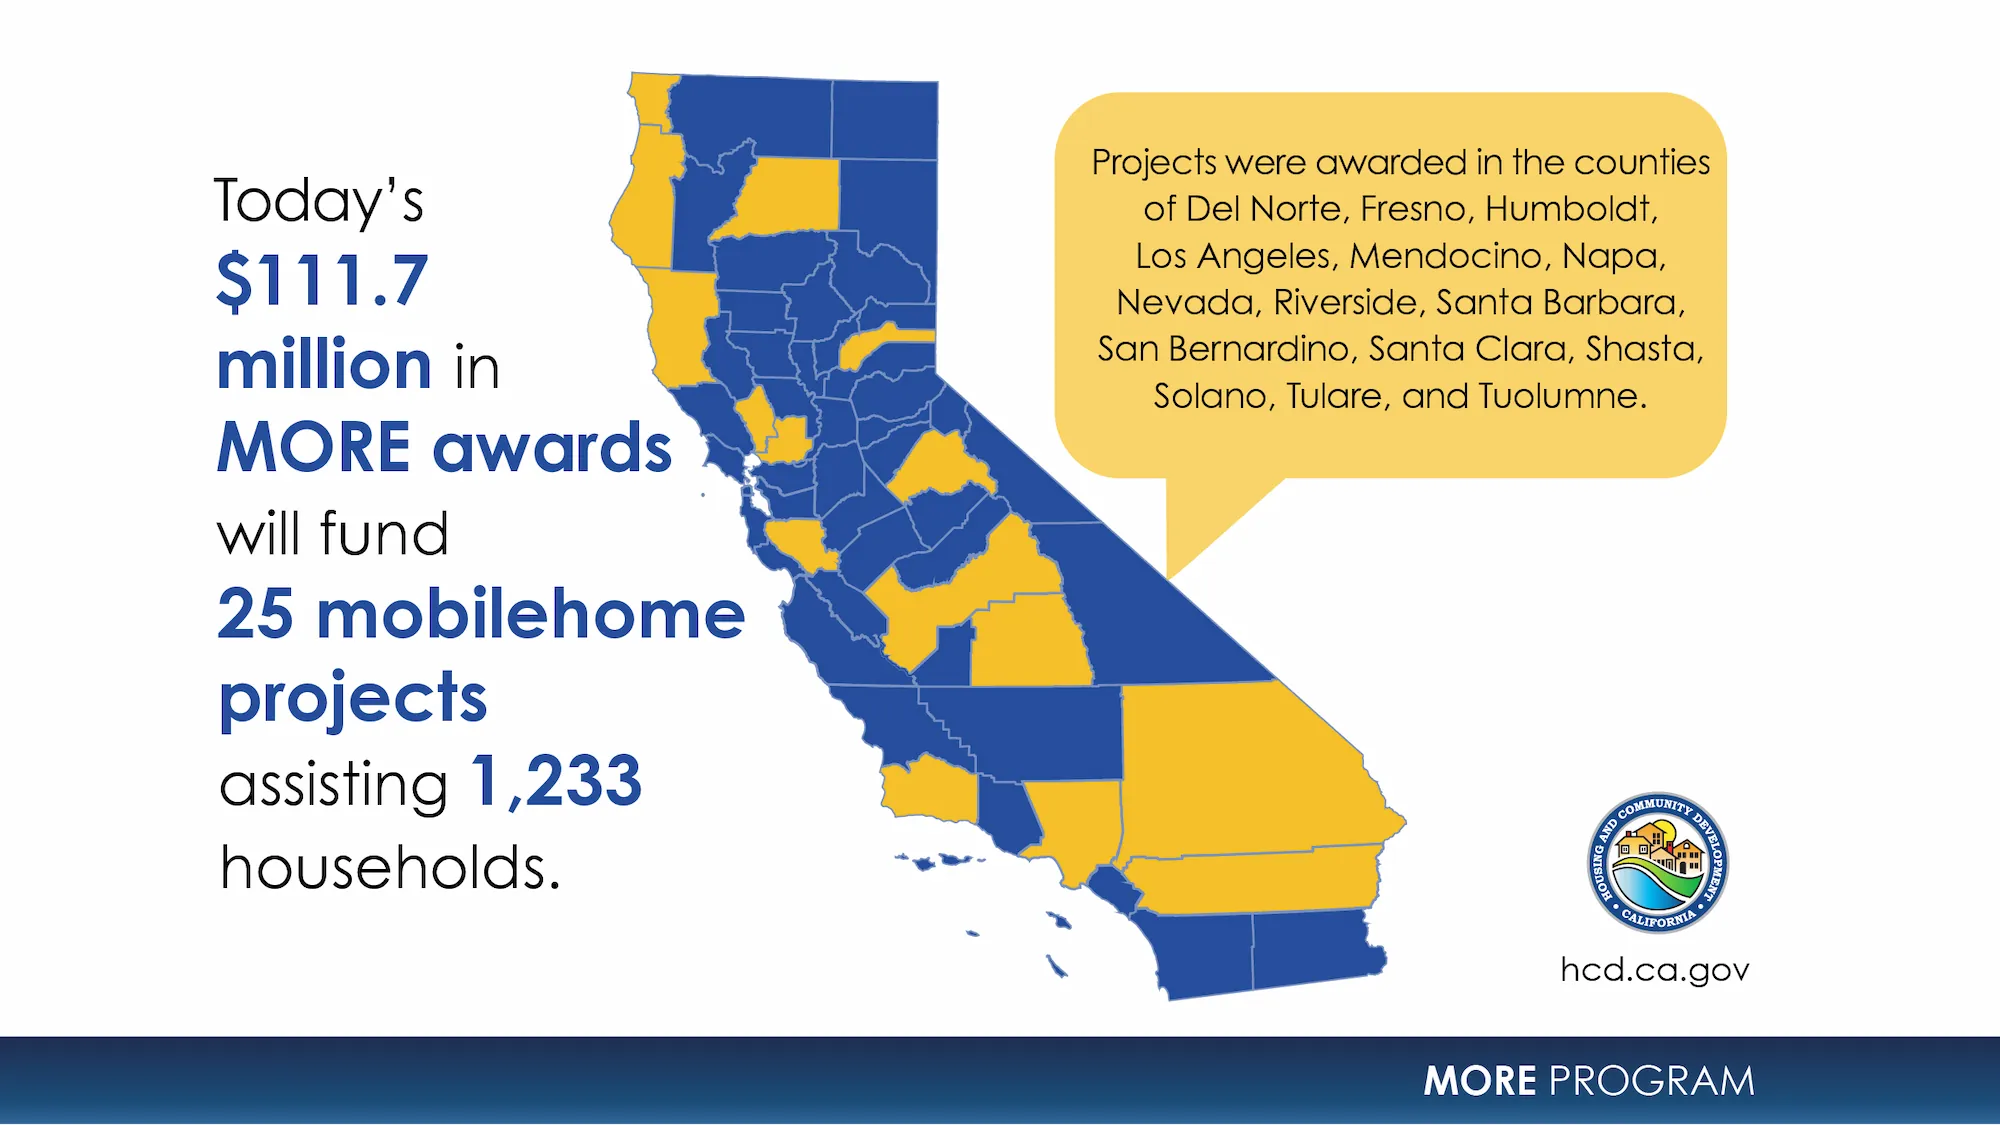 Map of California. Text says Today’s $111.7 million in MORE awards will fund 25 mobilehome projects assisting 1,233 households. Projects were awarded in the counties of Del Norte, Fresno, Humboldt, Los Angeles, Mendocino, Napa, Nevada, Riverside, Santa Barbara, San Bernardino, Santa Clara, Shasta, Solano, Tulare and Tuolumne.